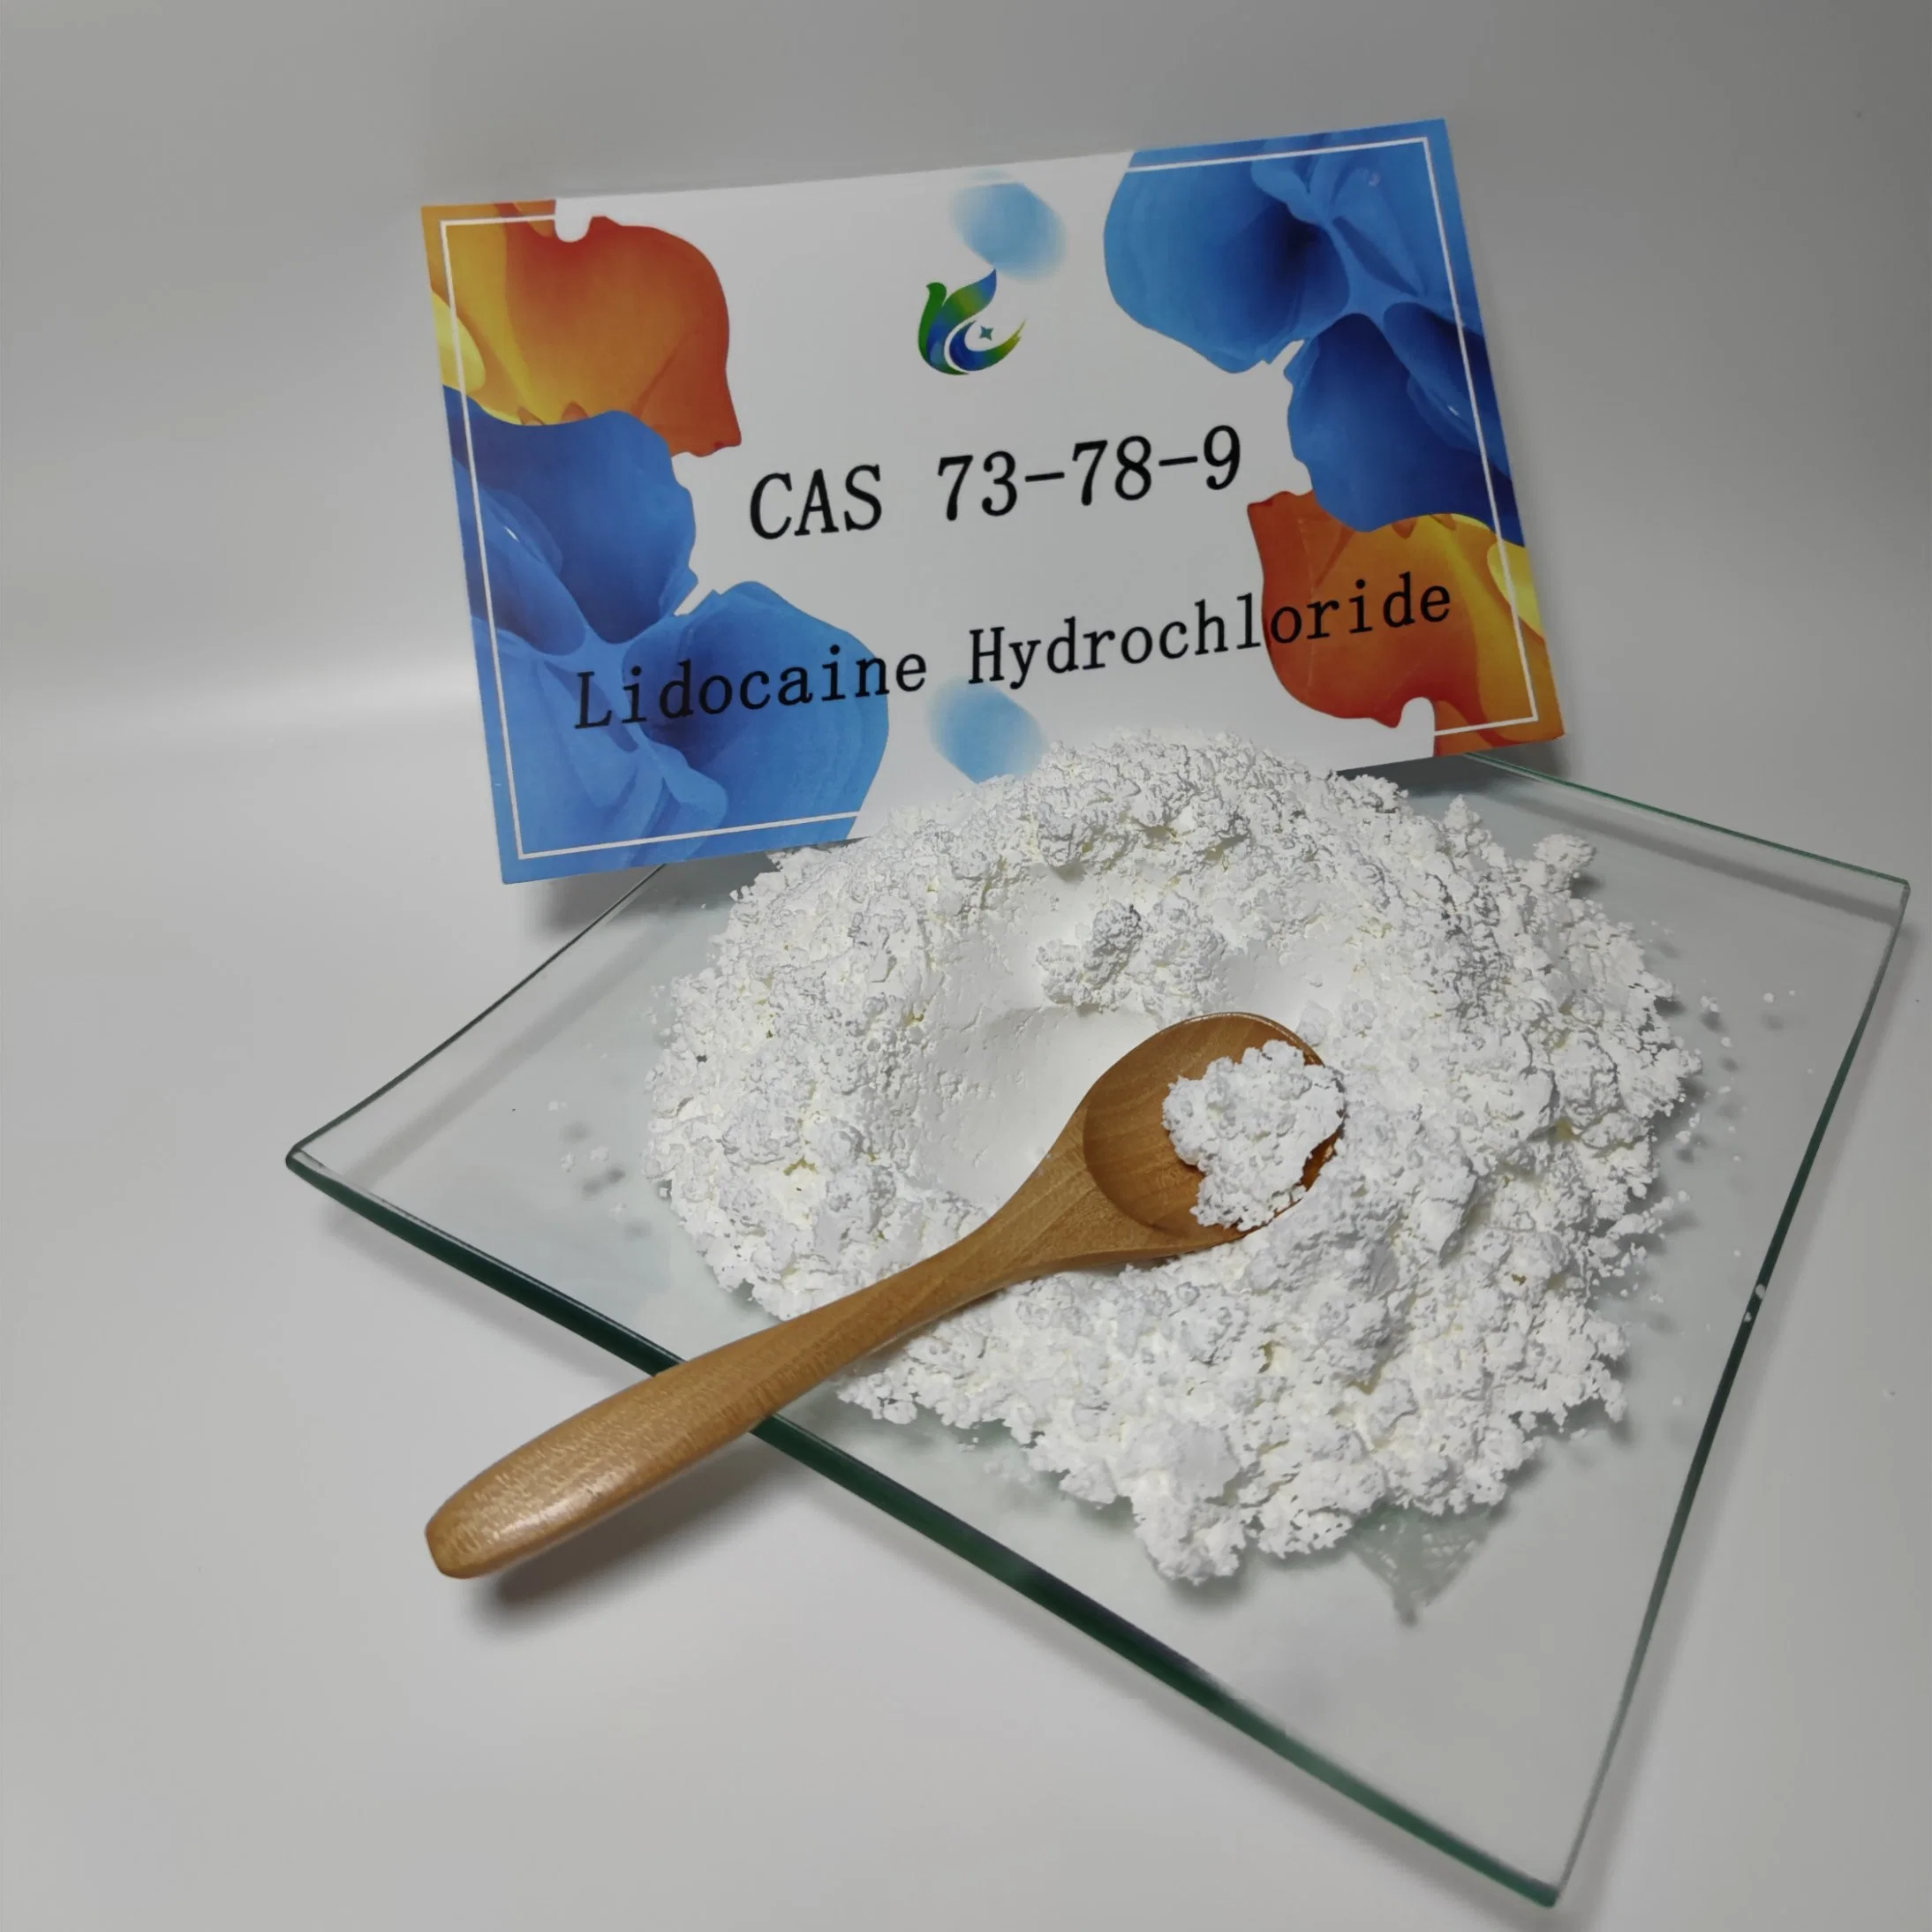 Local Anaesthetic 99% Purity Lidocaine Hydrochloride/Lidocaine HCl Pain Relief Powder CAS 73-78-9 Security Clearance